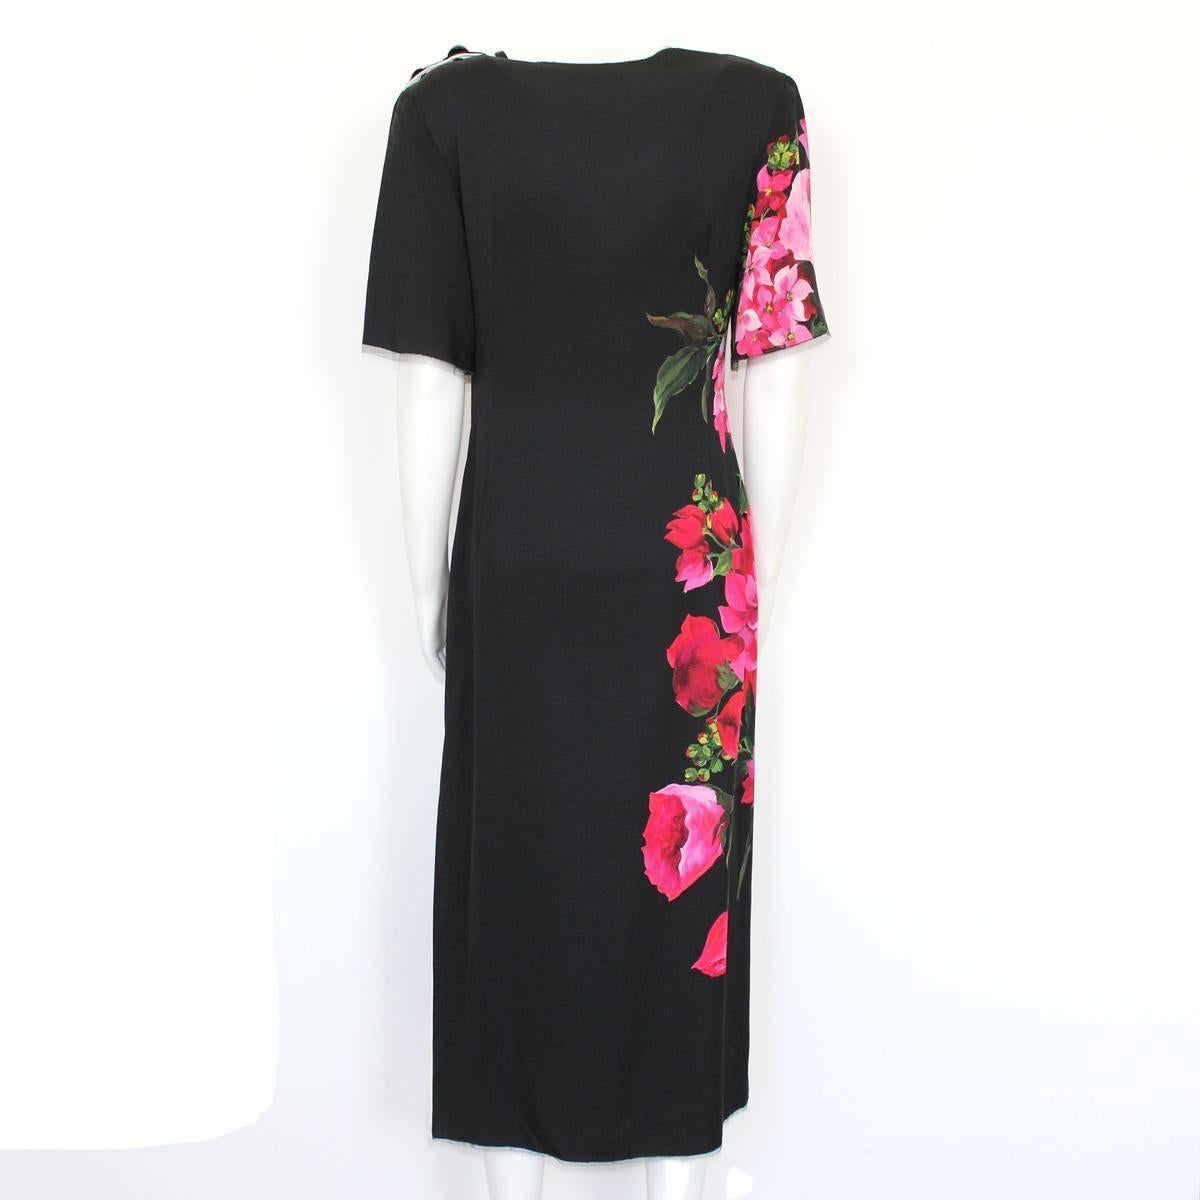 Stunning and Dolce & Gabbana dress
Long dress
Silk
Black color
Amazing floral pattern
Lace profiles
Three buttons on shoulder
White opening
Total lenght (shoulder/hem) cm 120 (47.2 inches)
Conditions :
Couple of less vivibles stains and couple of